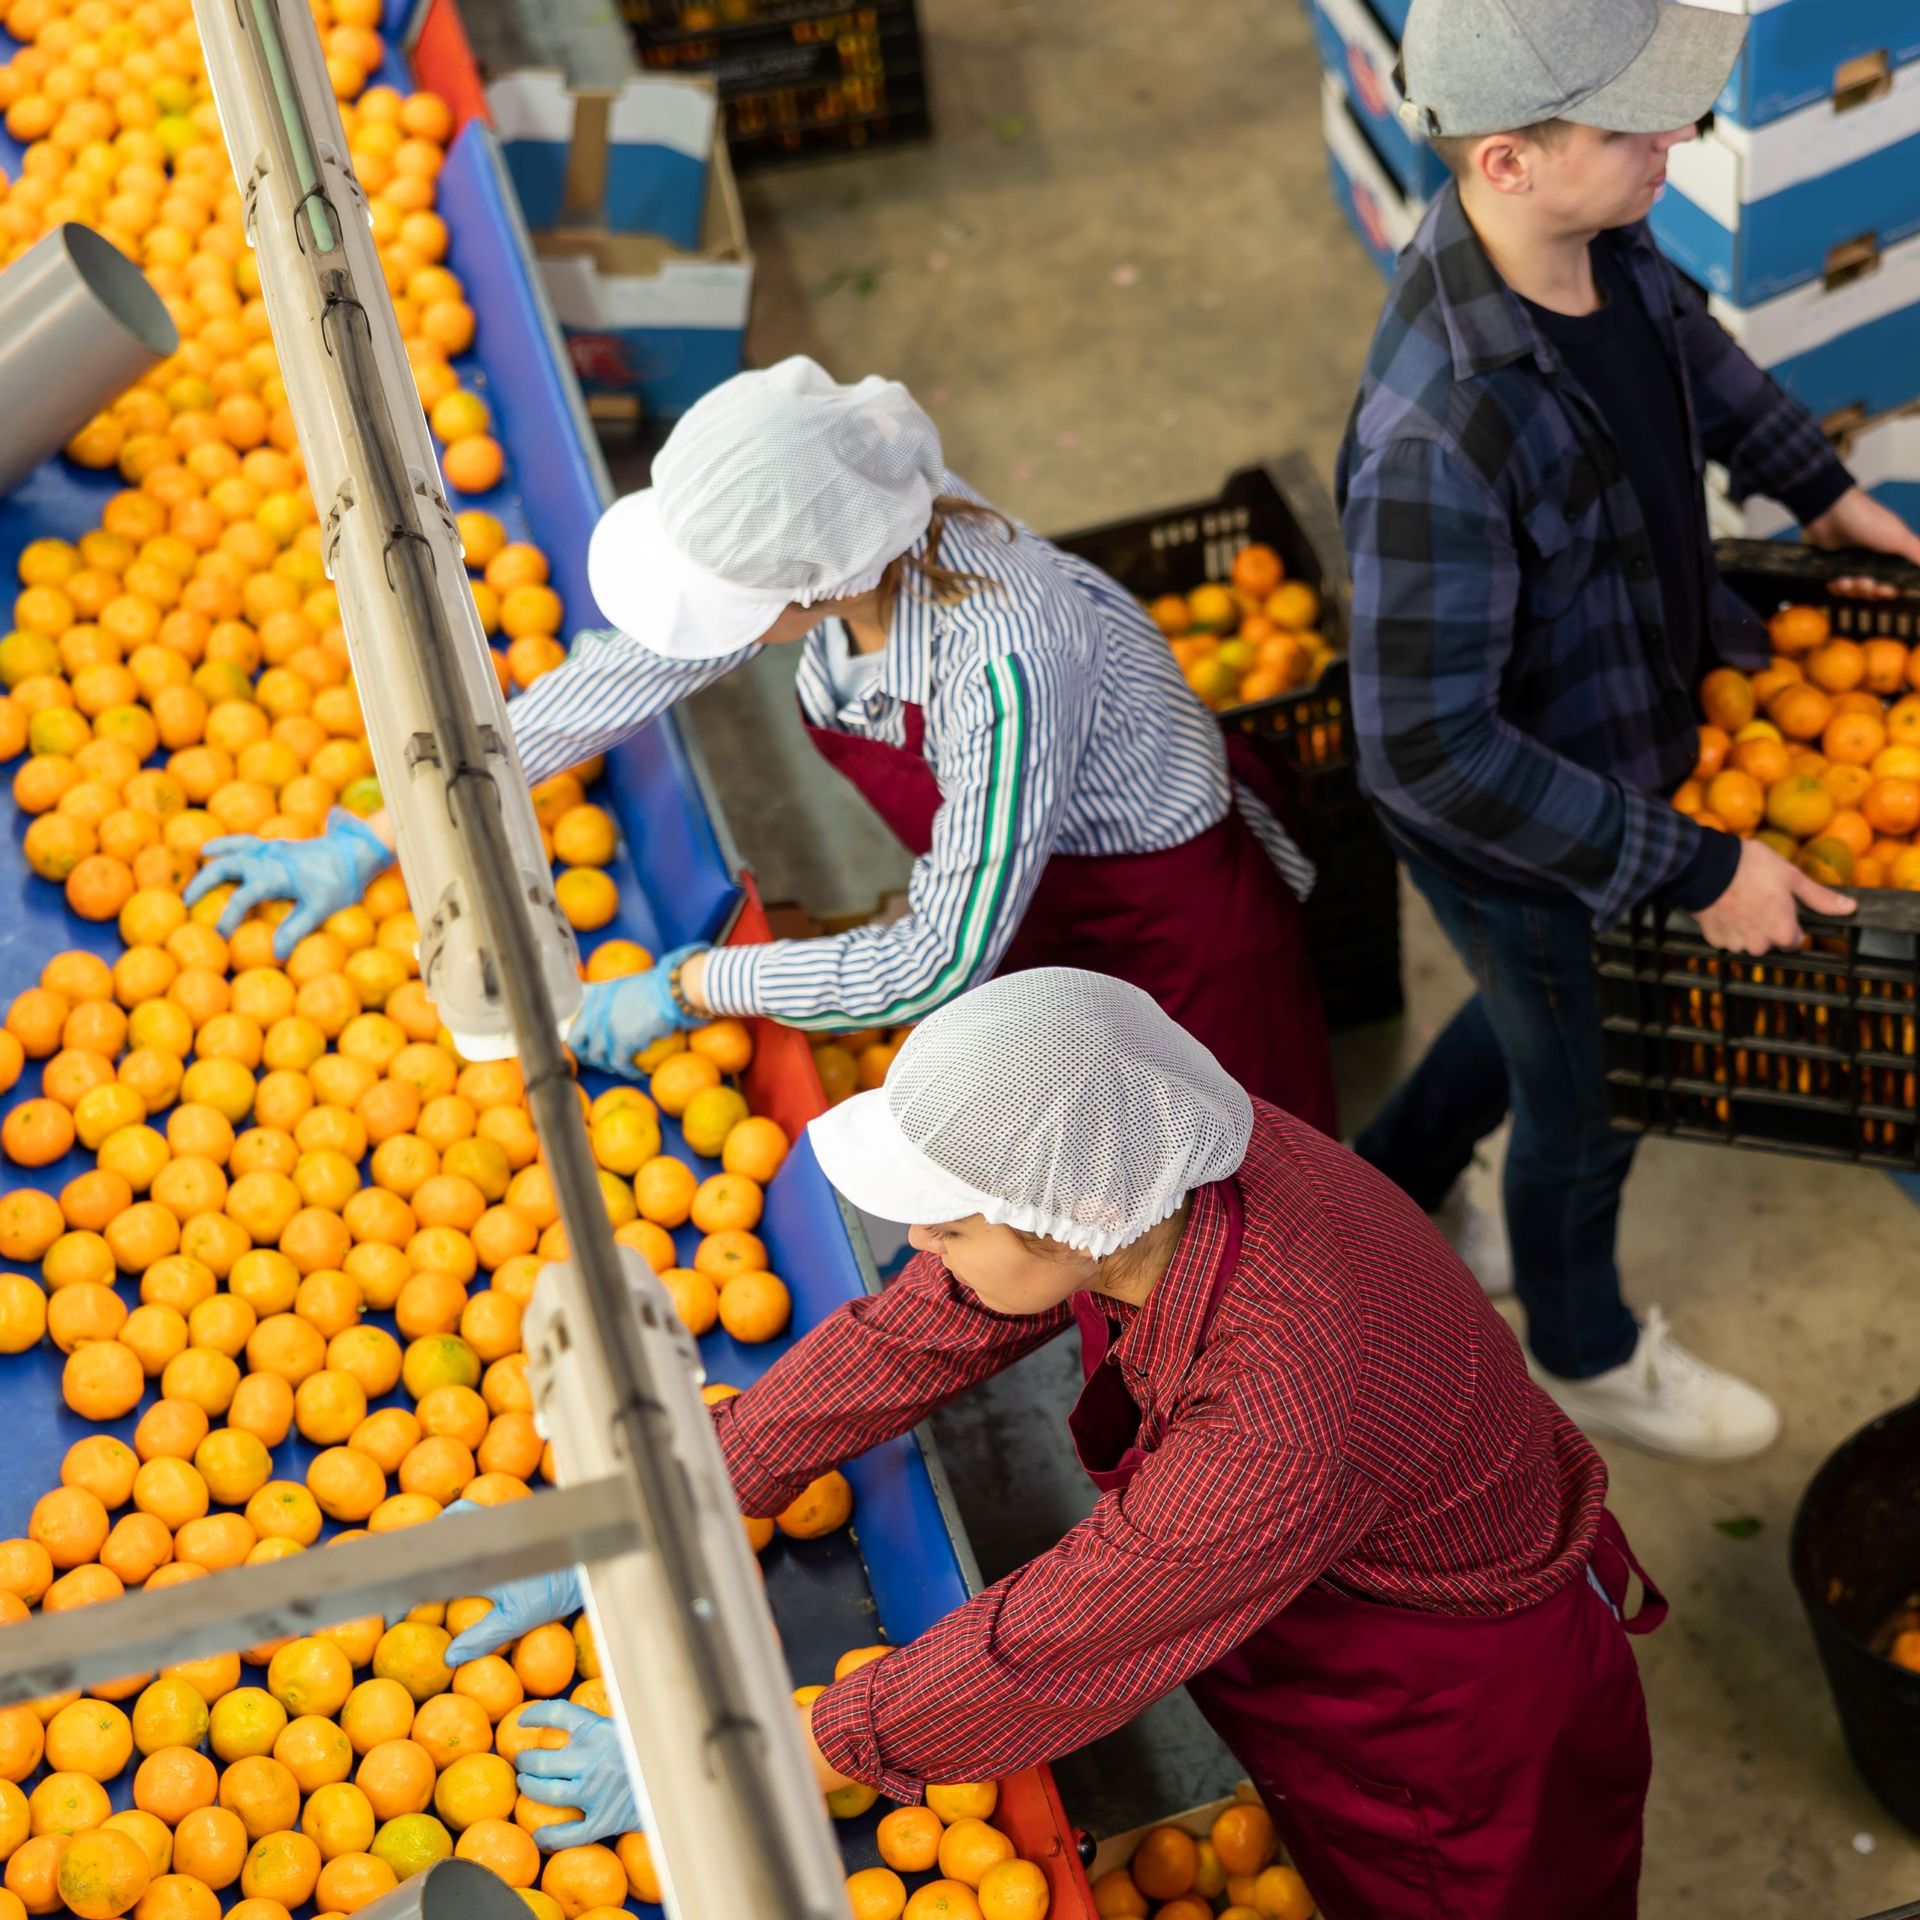 Image of a food processing facility with workers grading mandarins